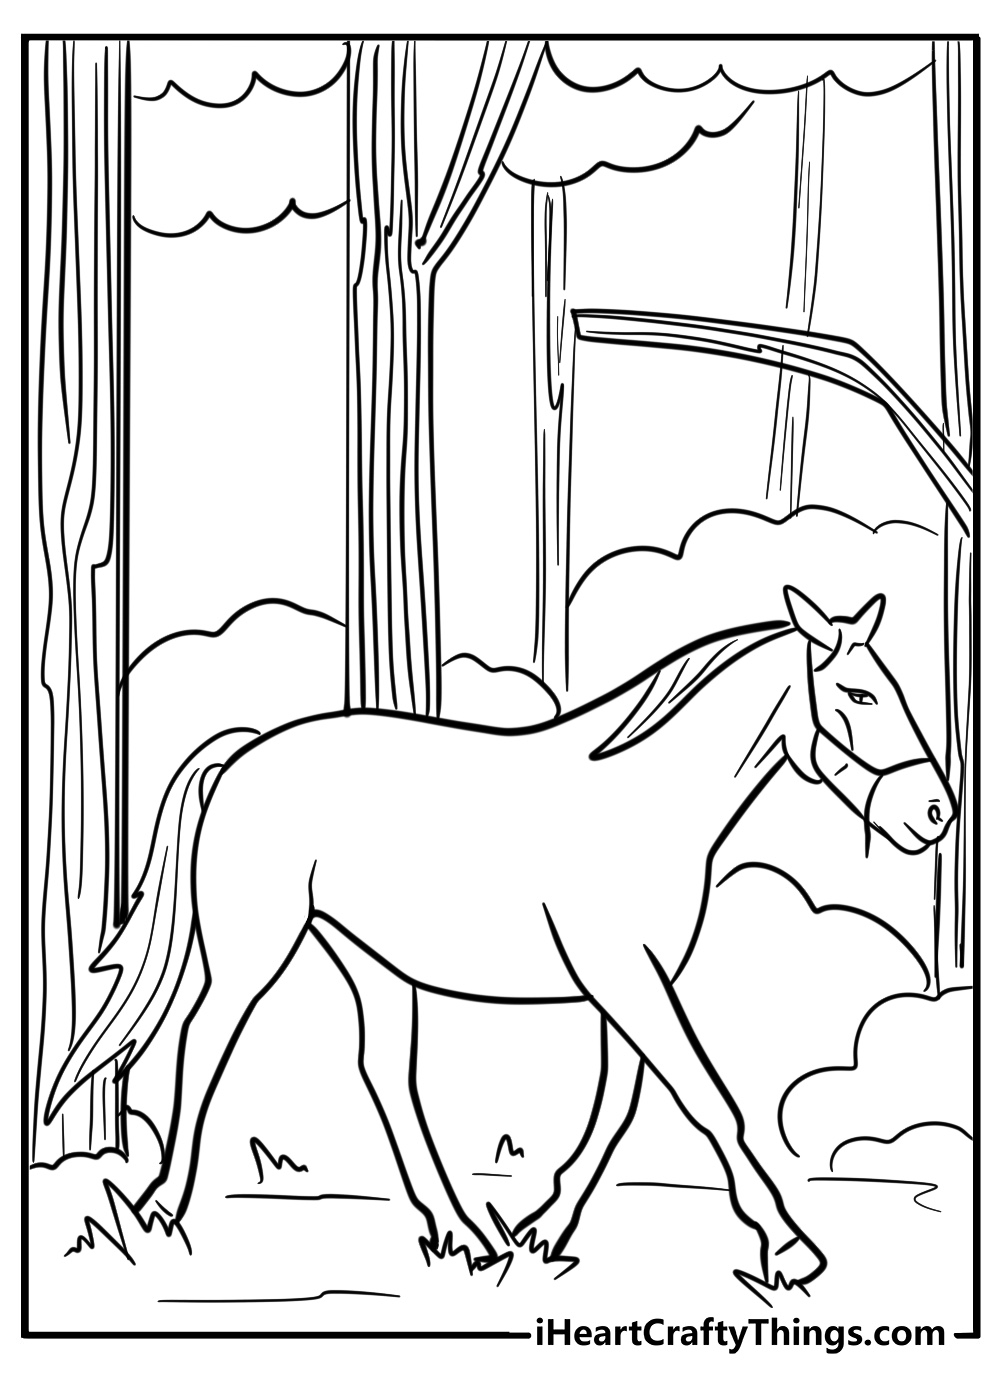 Pegasus coloring page trotting in the forest